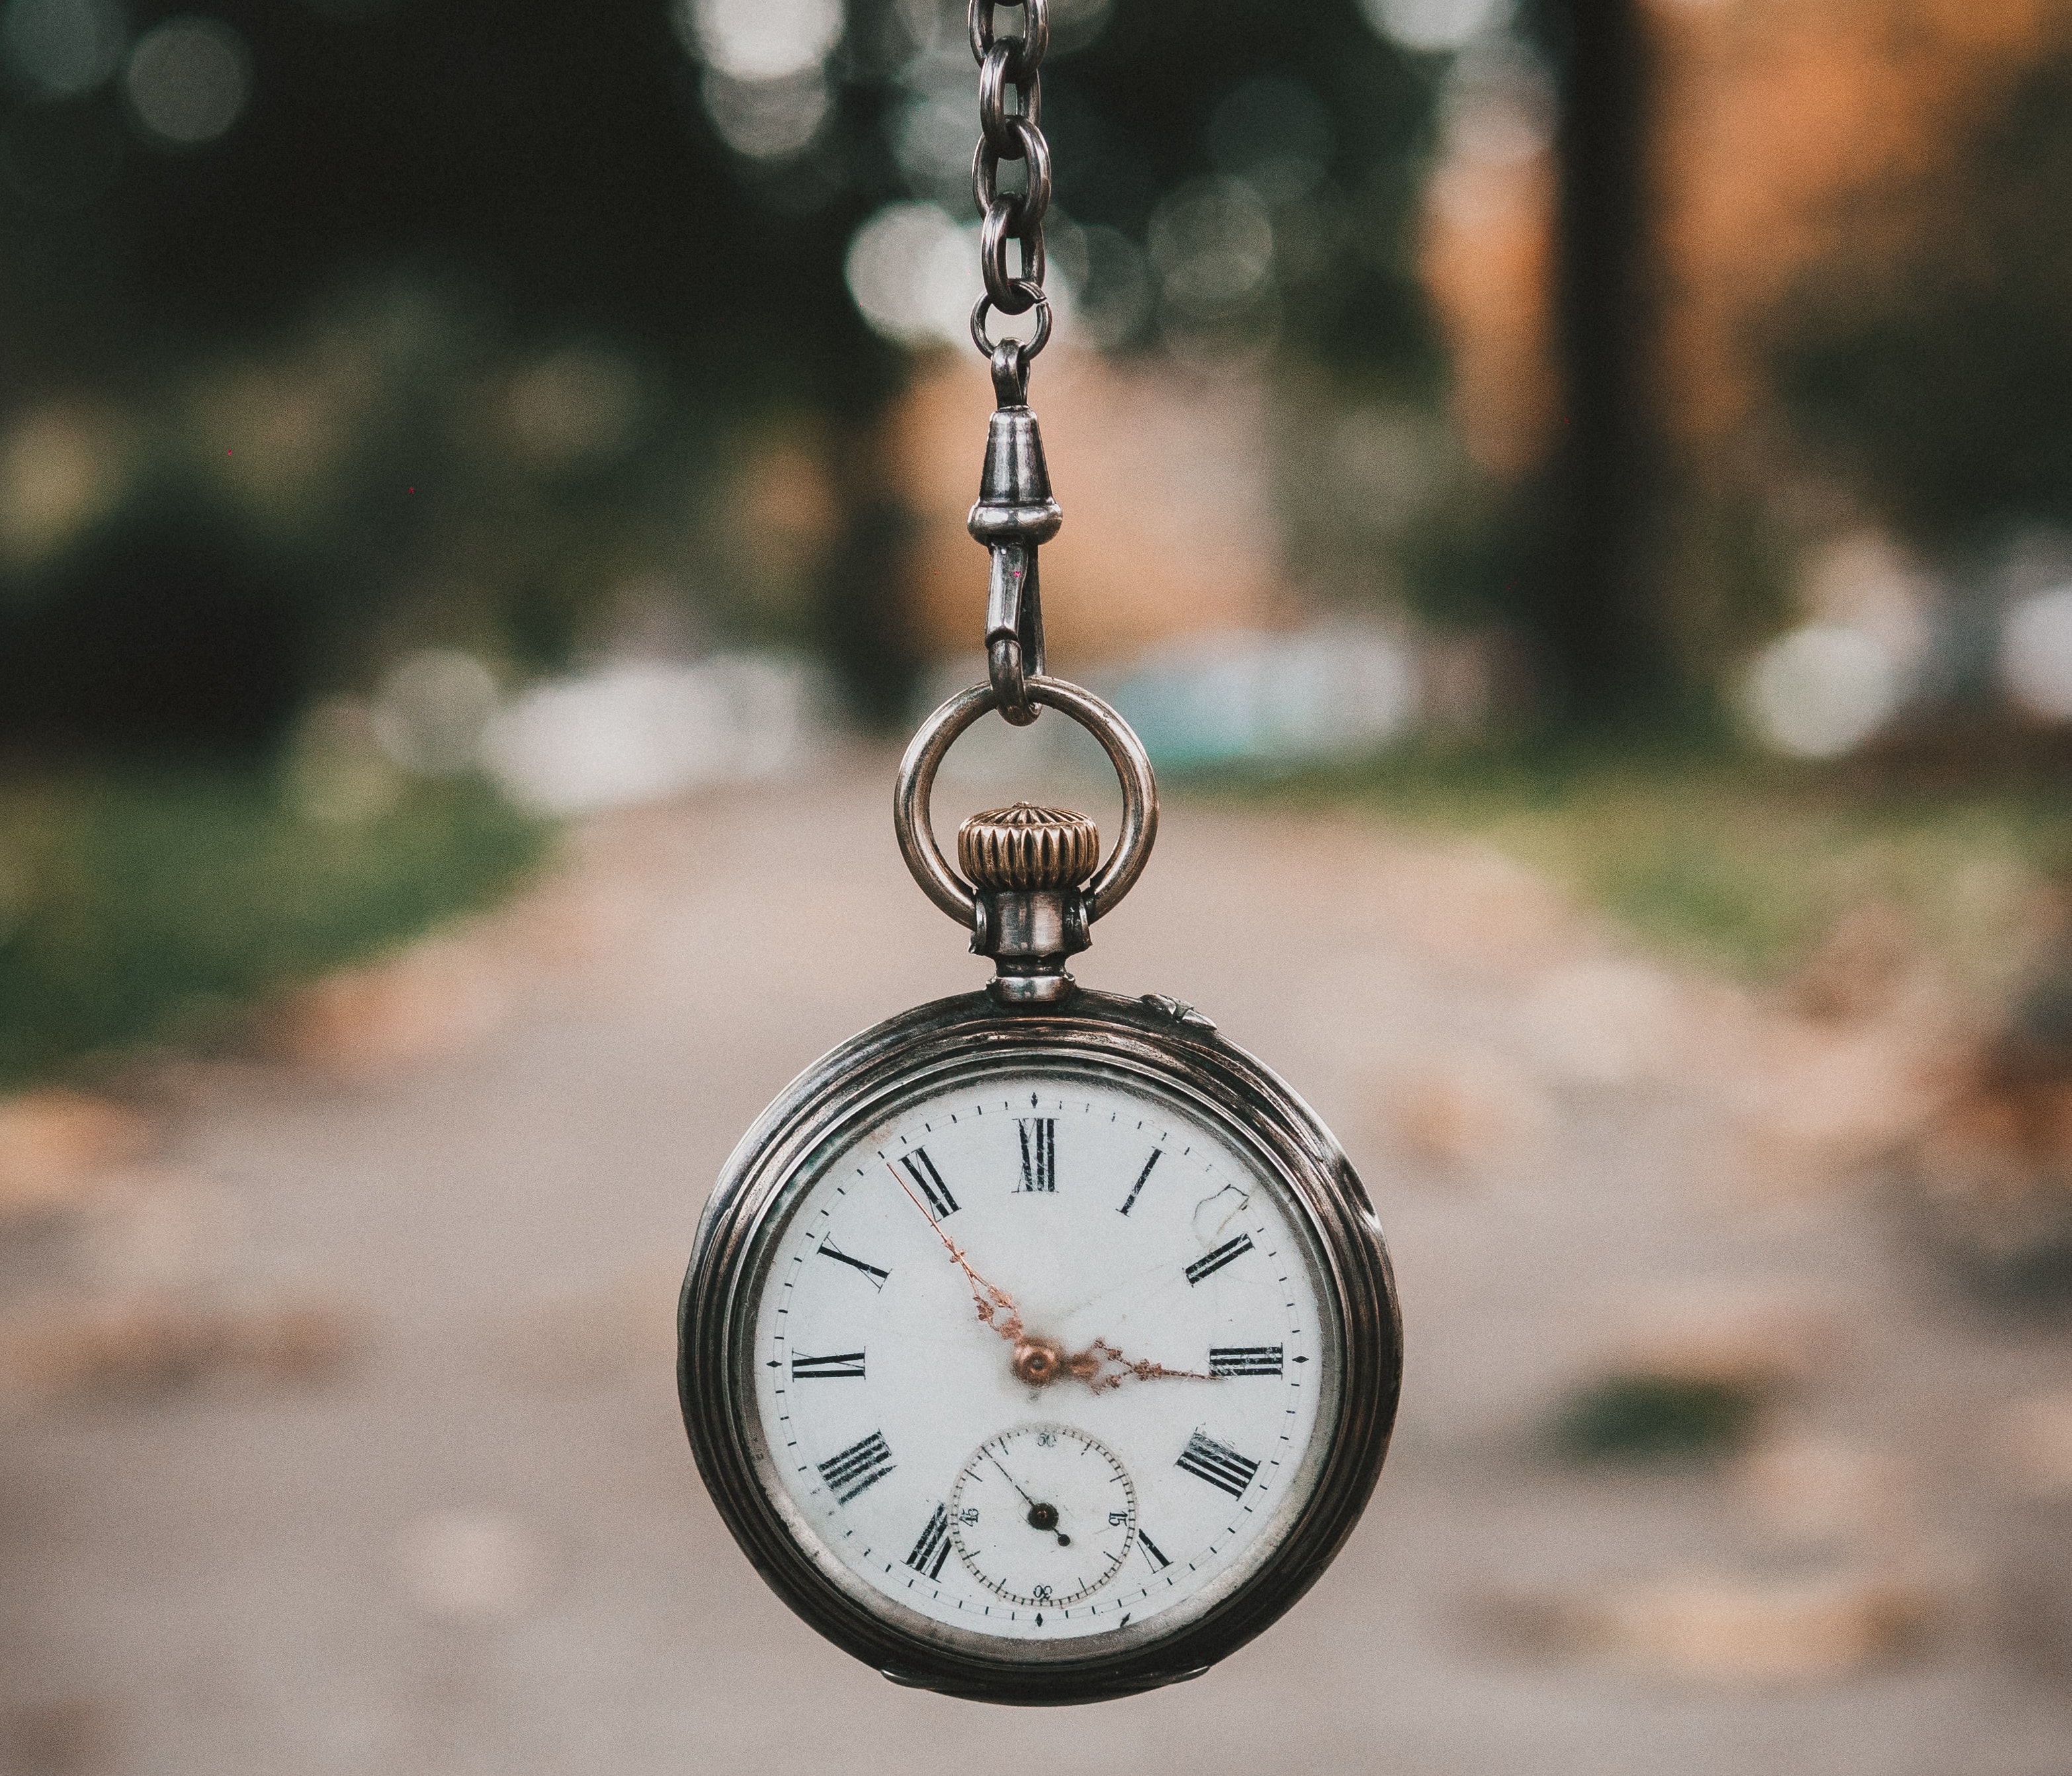 Pocket watch hanging in front of a blurred background